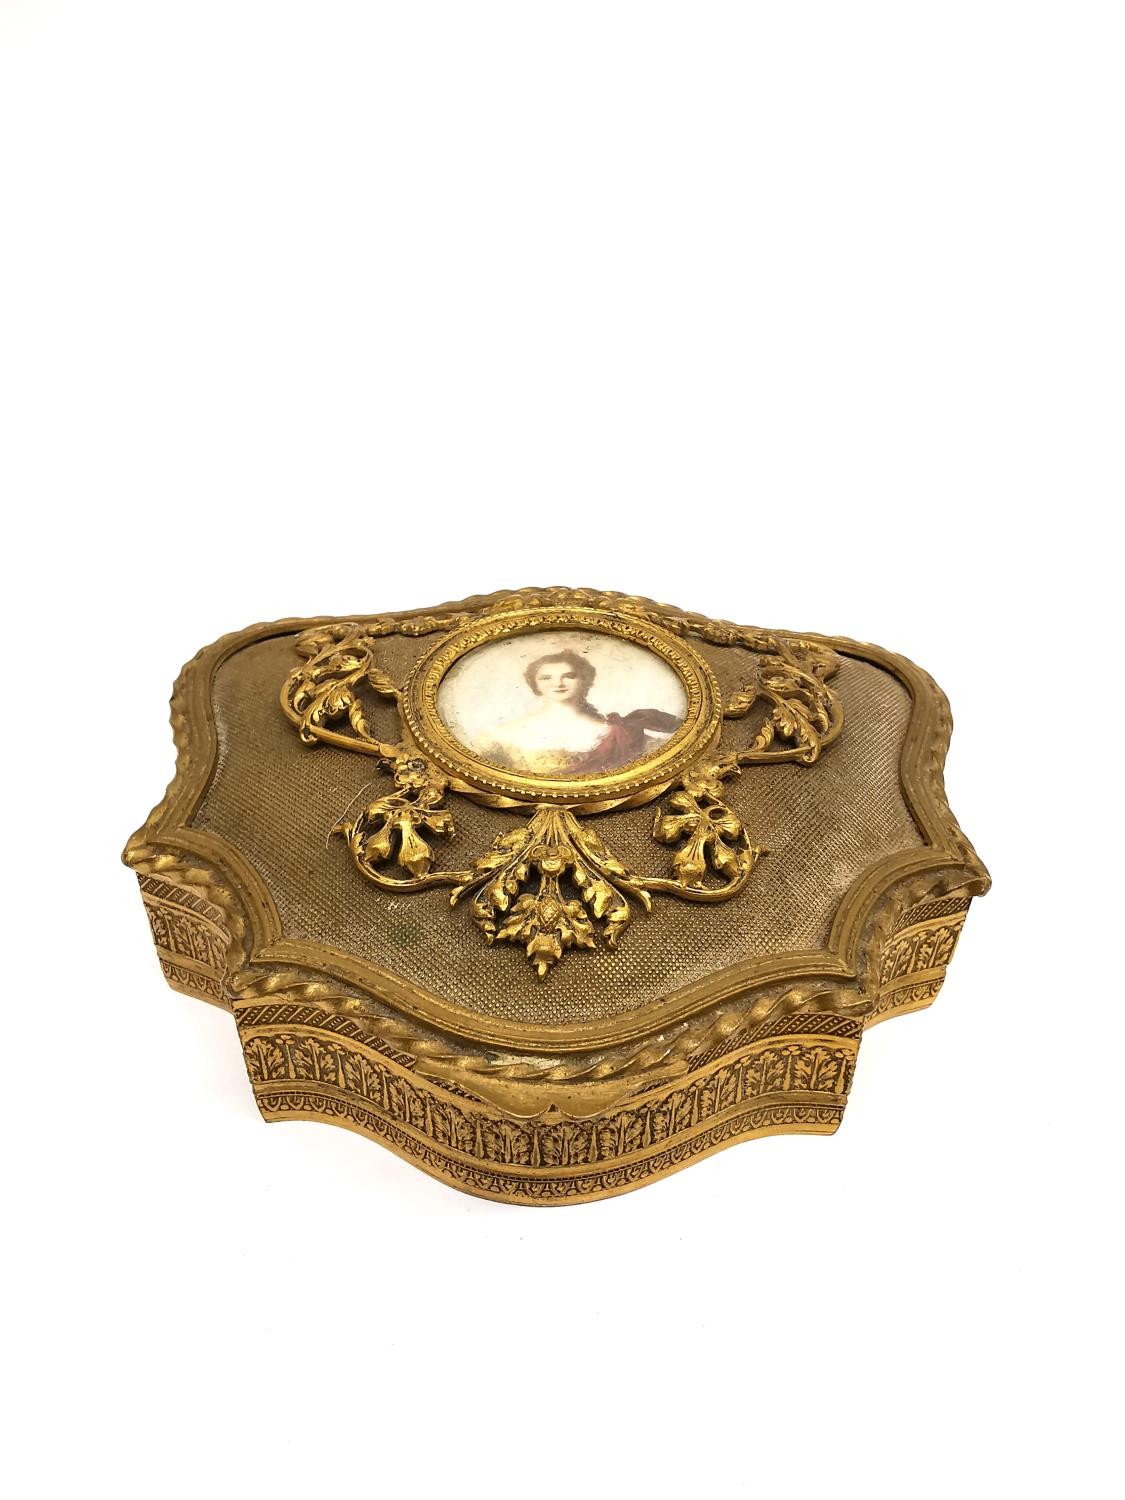 A 19th century French gilt brass ormolus jewellery box with painted portrait plaque to the lid. - Image 2 of 8